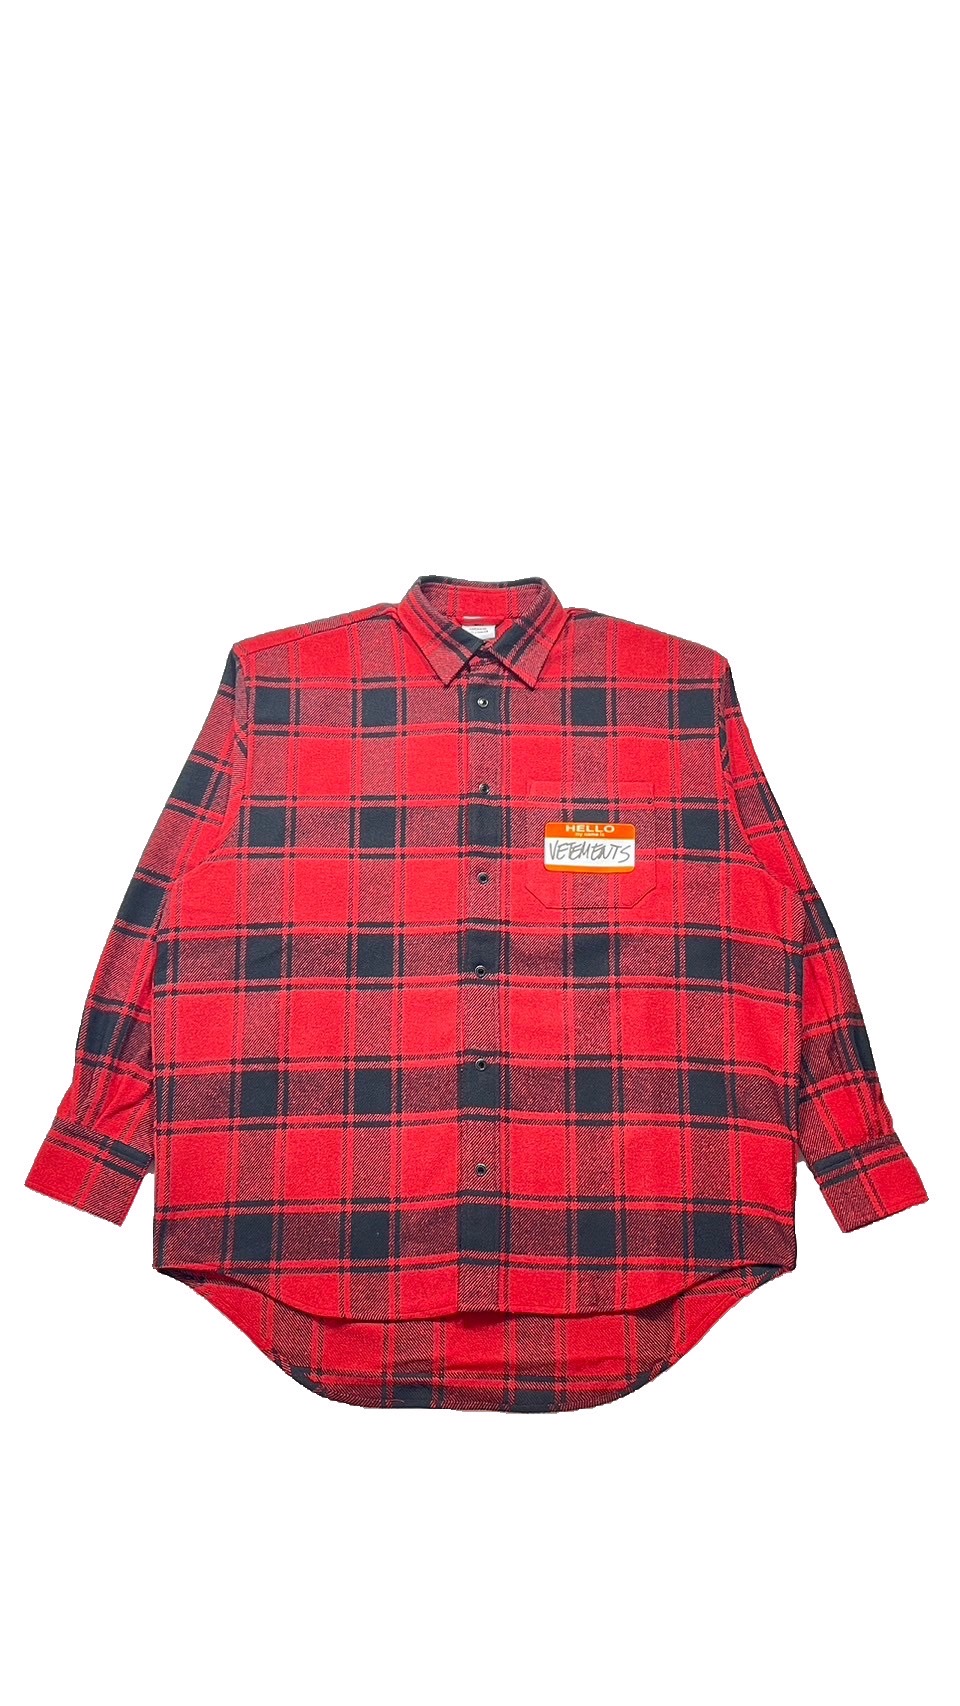 VETEMENTS　MY NAME IS VETEMENTS FLANNEL SHIRT